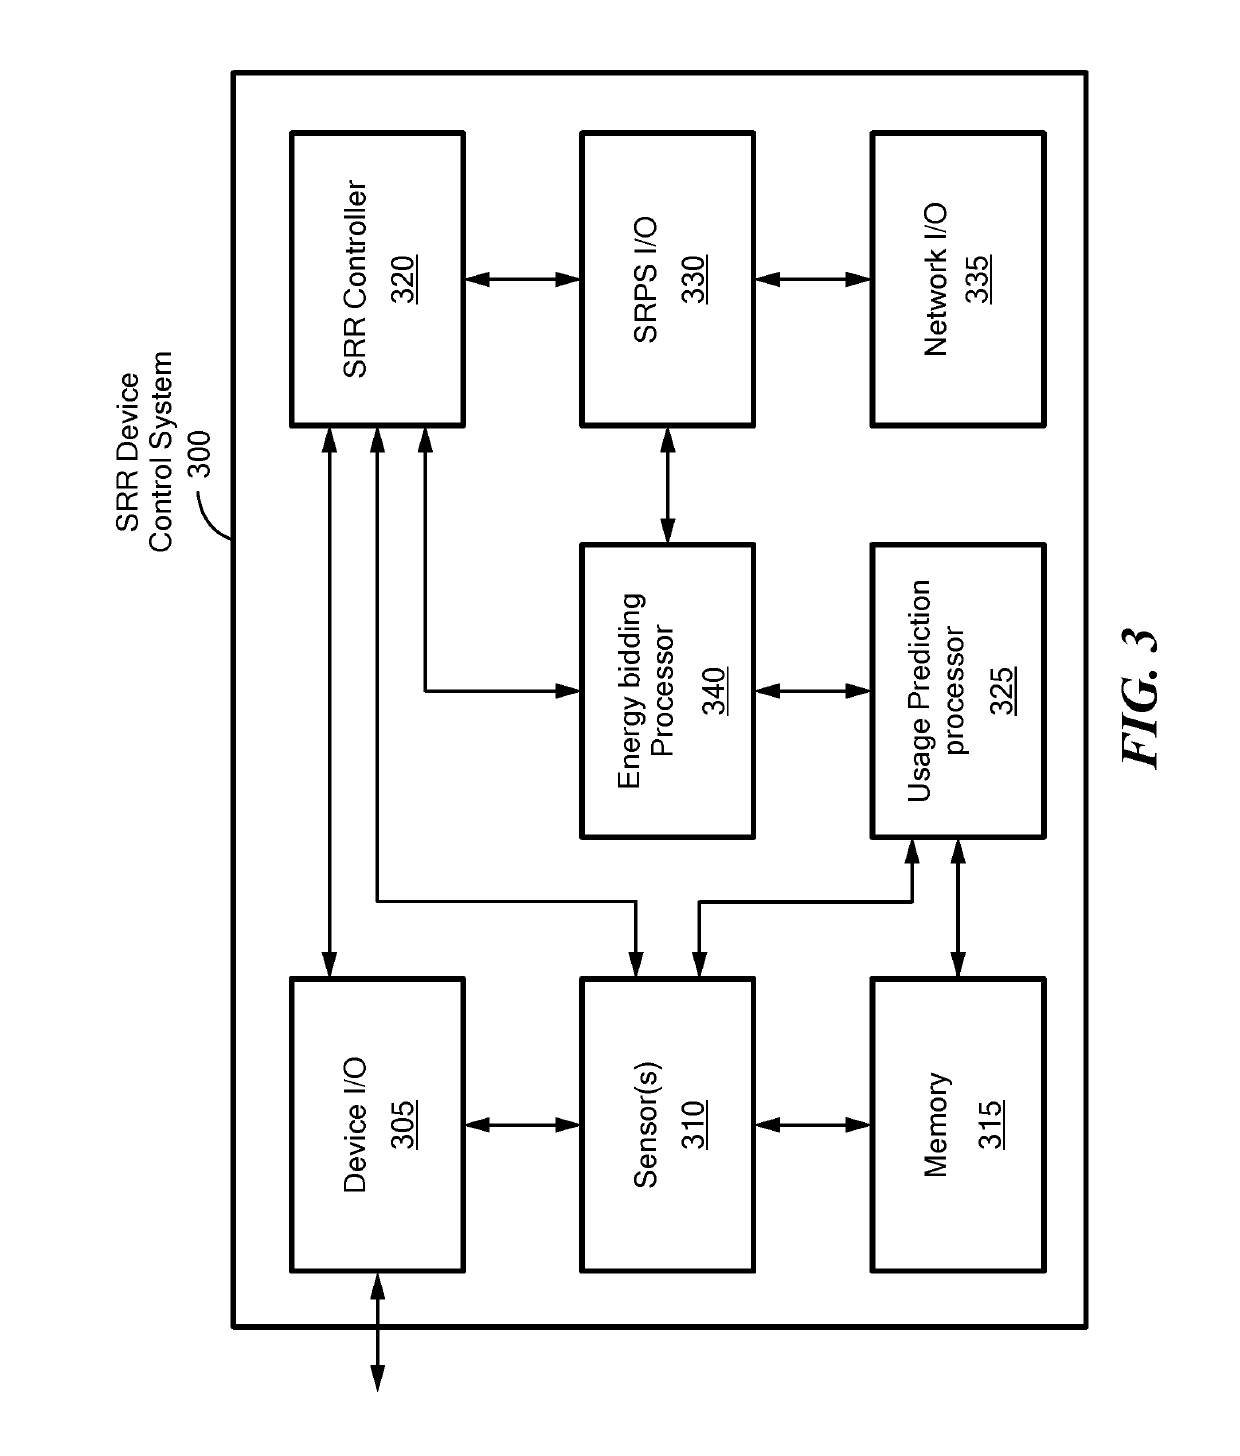 Methods and systems for secure scheduling and dispatching synthetic regulation reserve from distributed energy resources